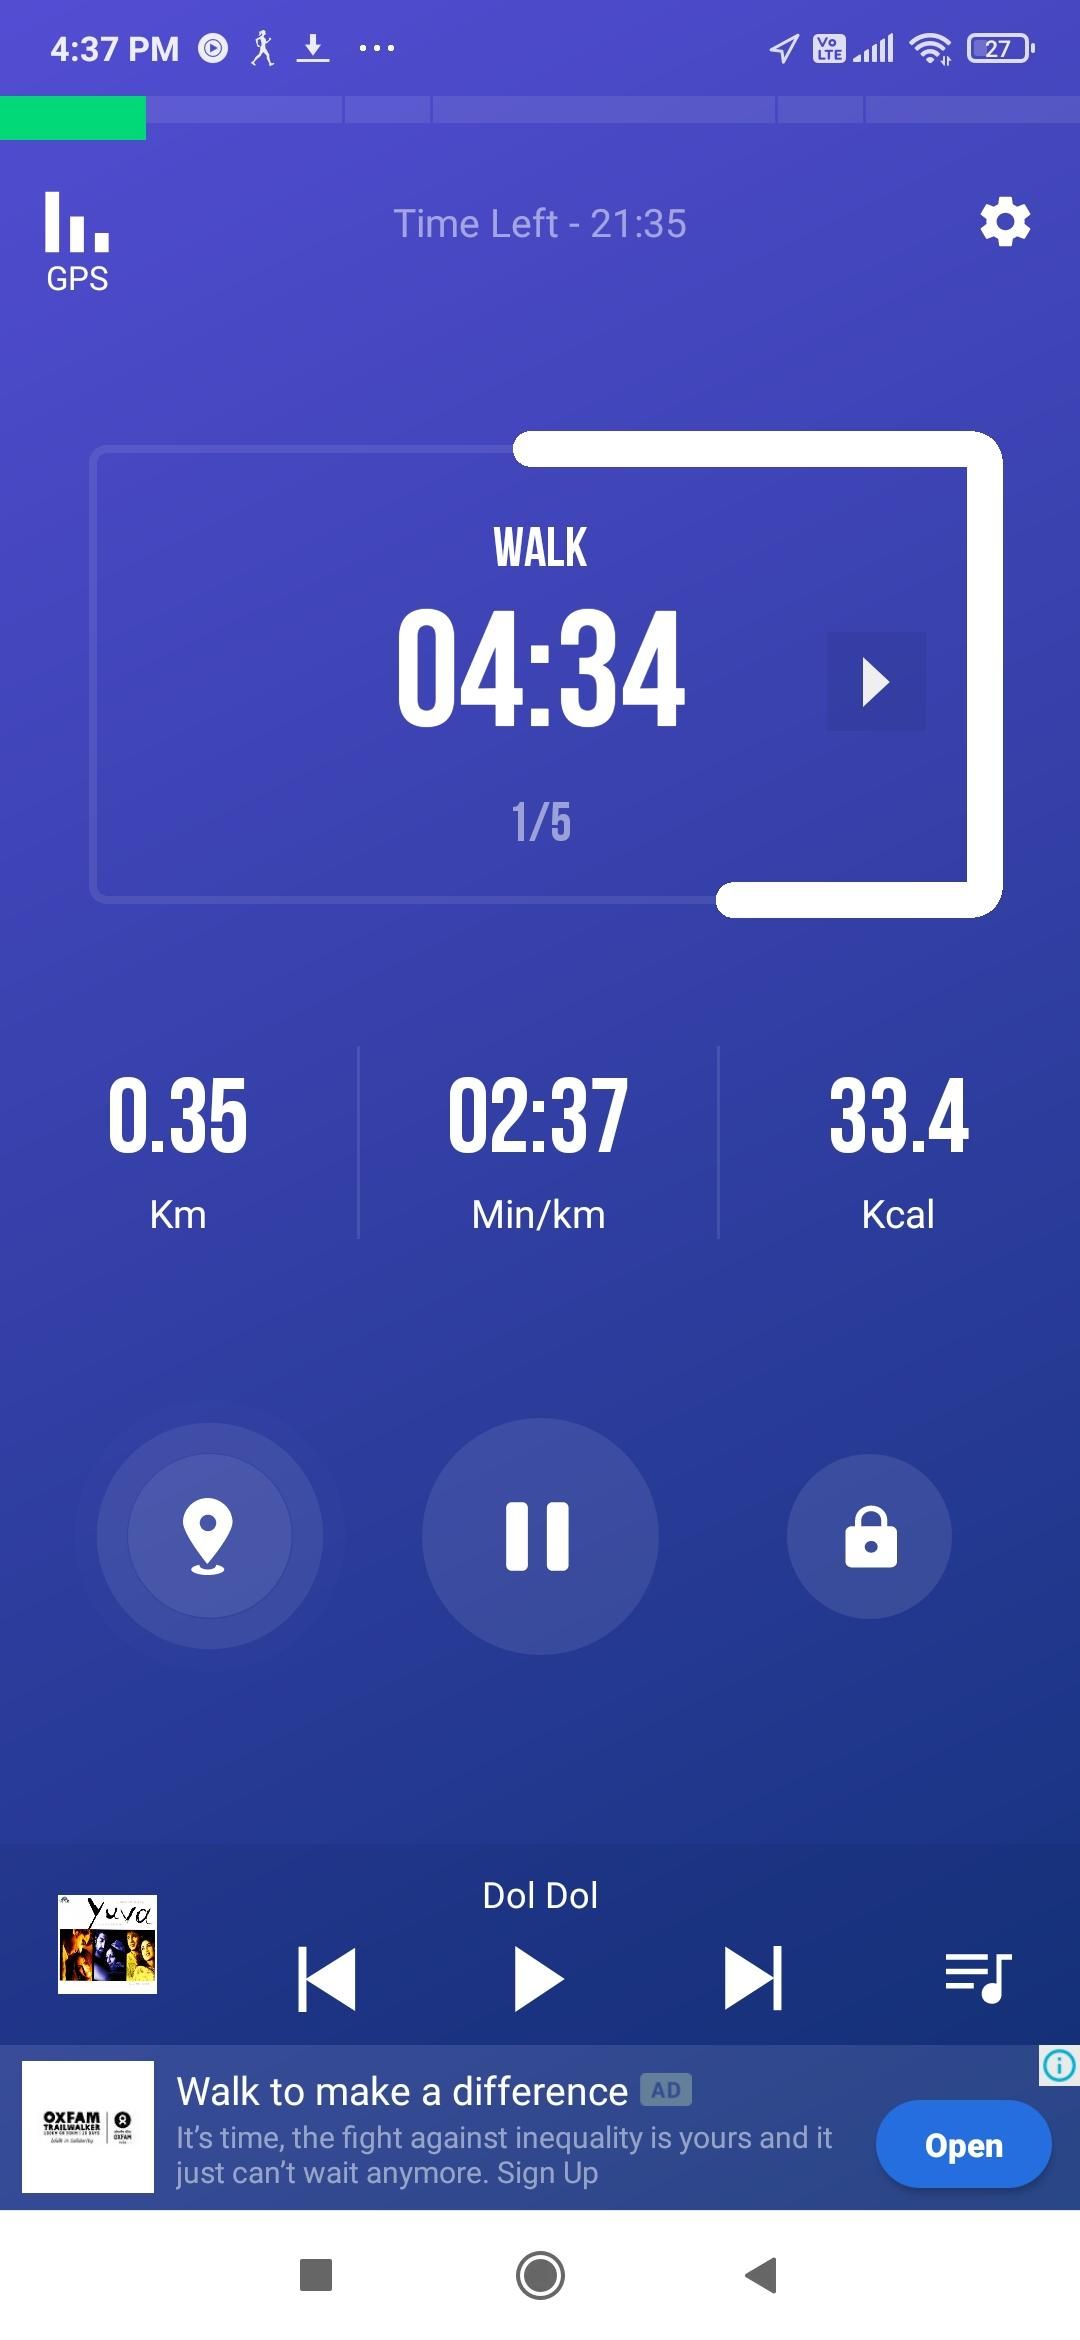 Walking for Weight Loss has guided audio instructions and hooks up with your music player app